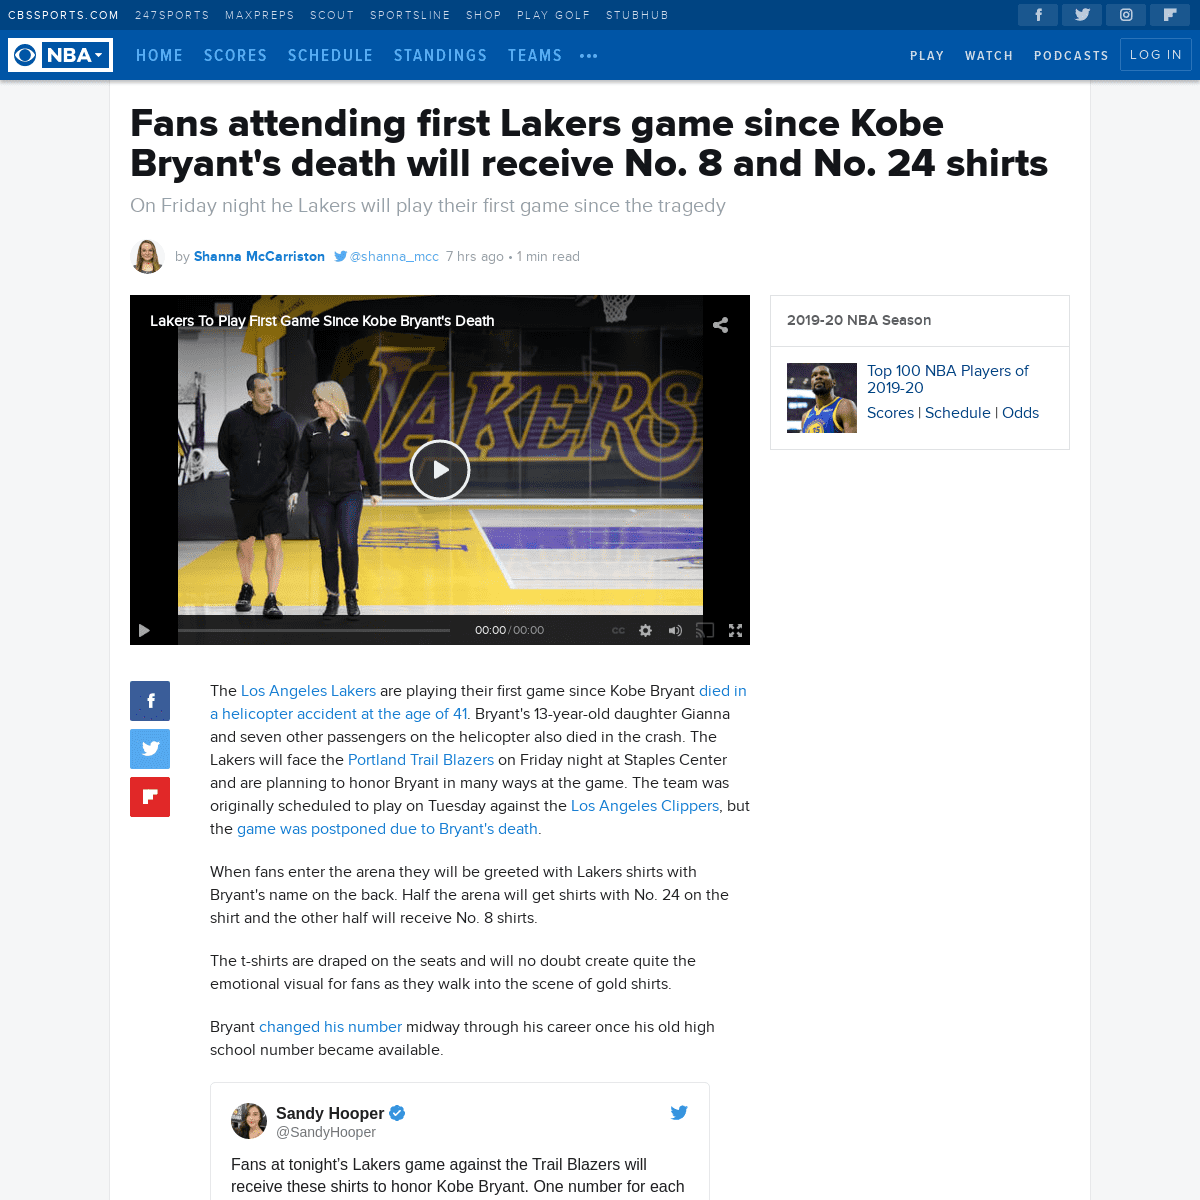 A complete backup of www.cbssports.com/nba/news/fans-attending-first-lakers-game-since-kobe-bryants-death-will-receive-no-8-and-